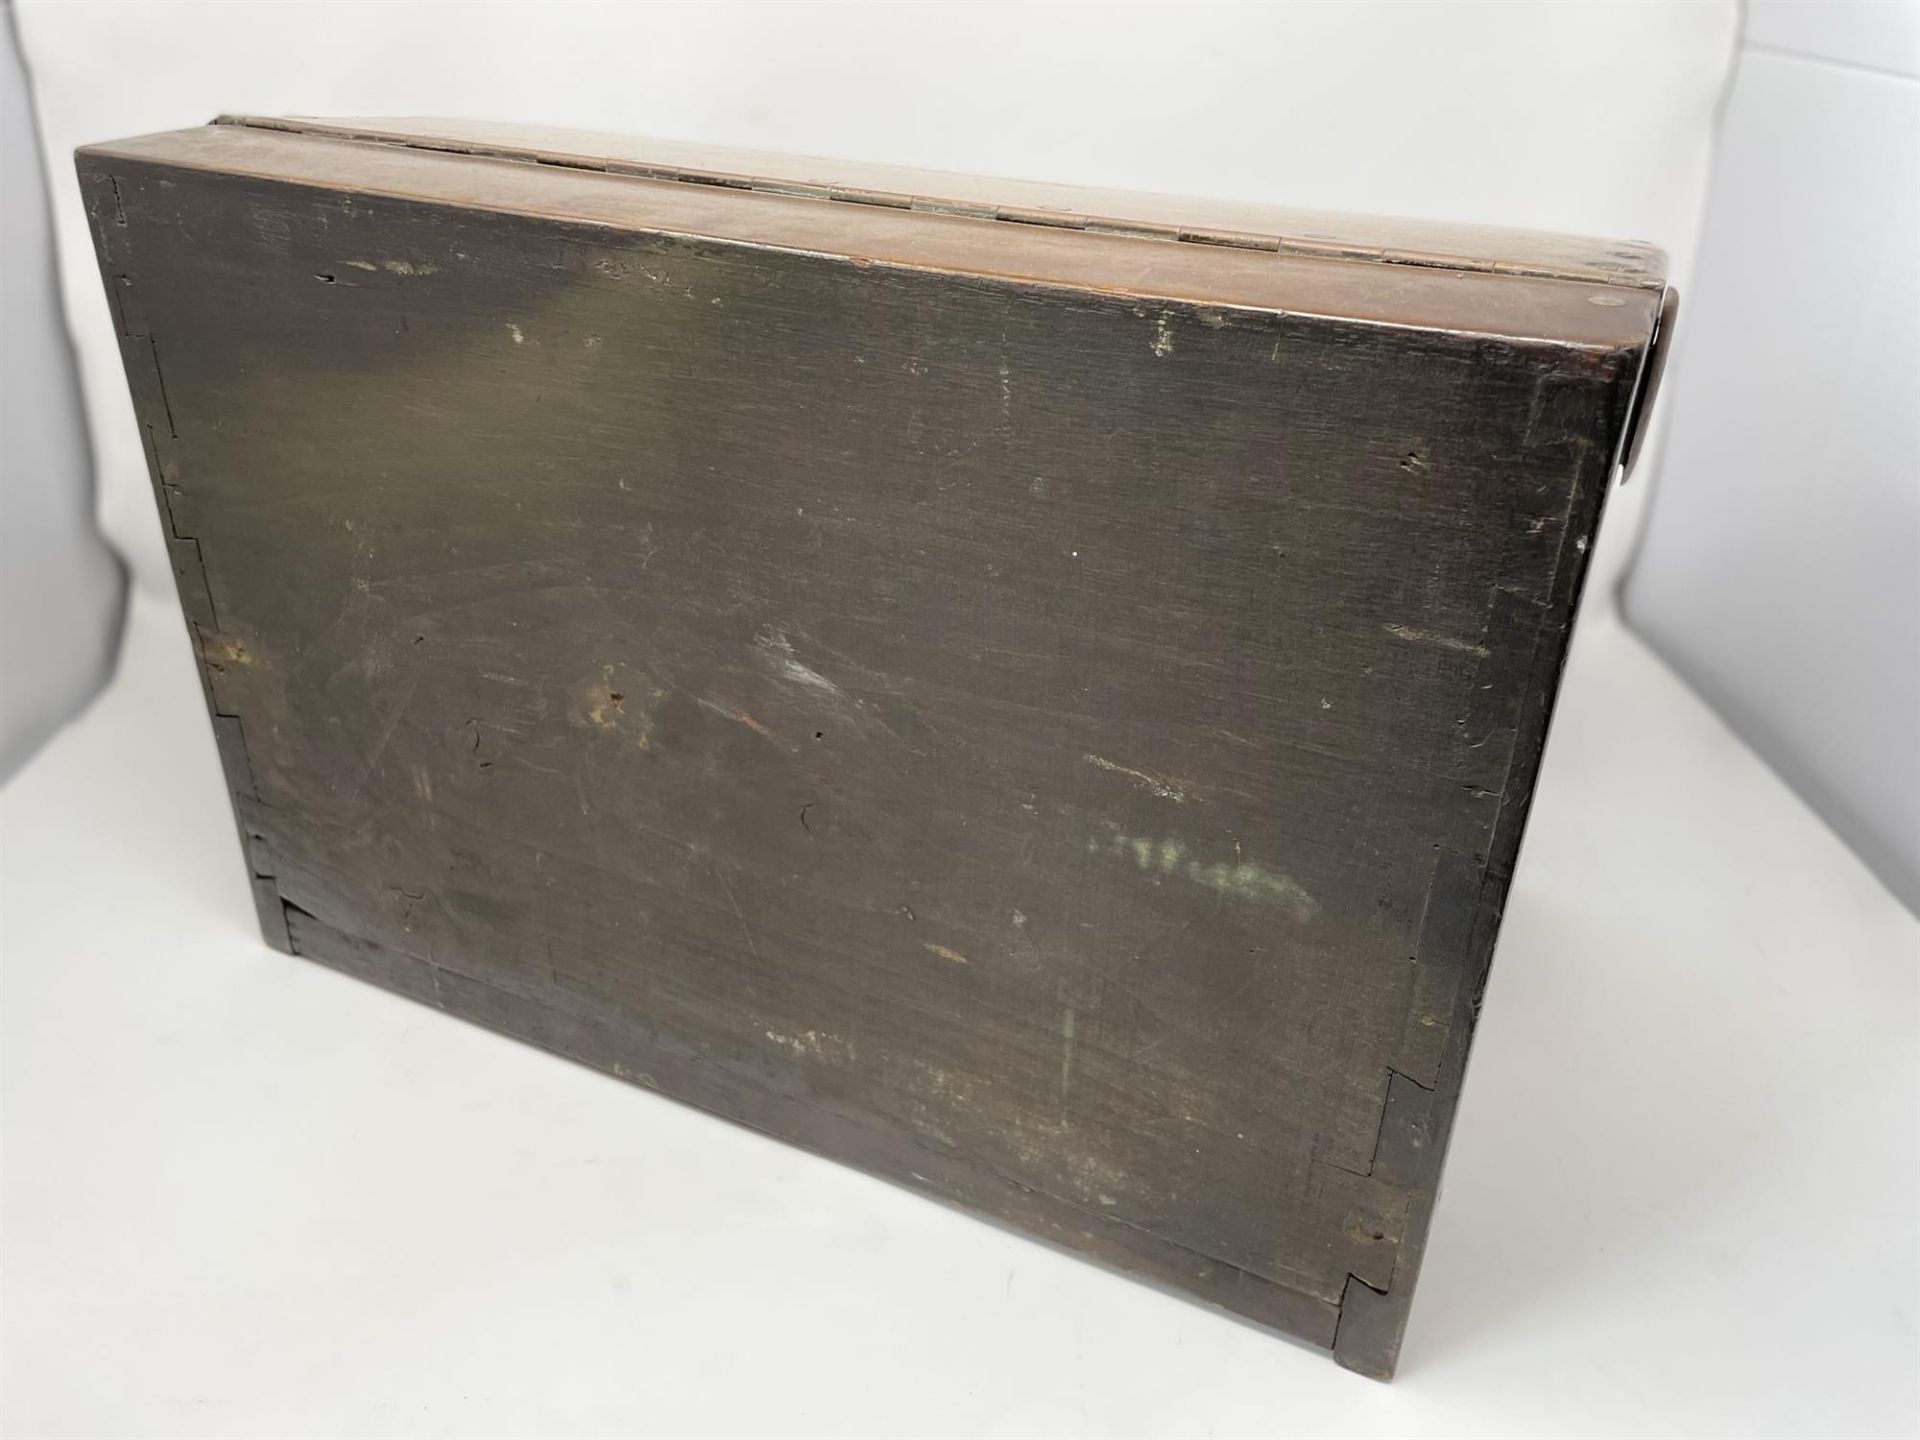 Early Vintage Running Board Box c1920s - Image 4 of 5